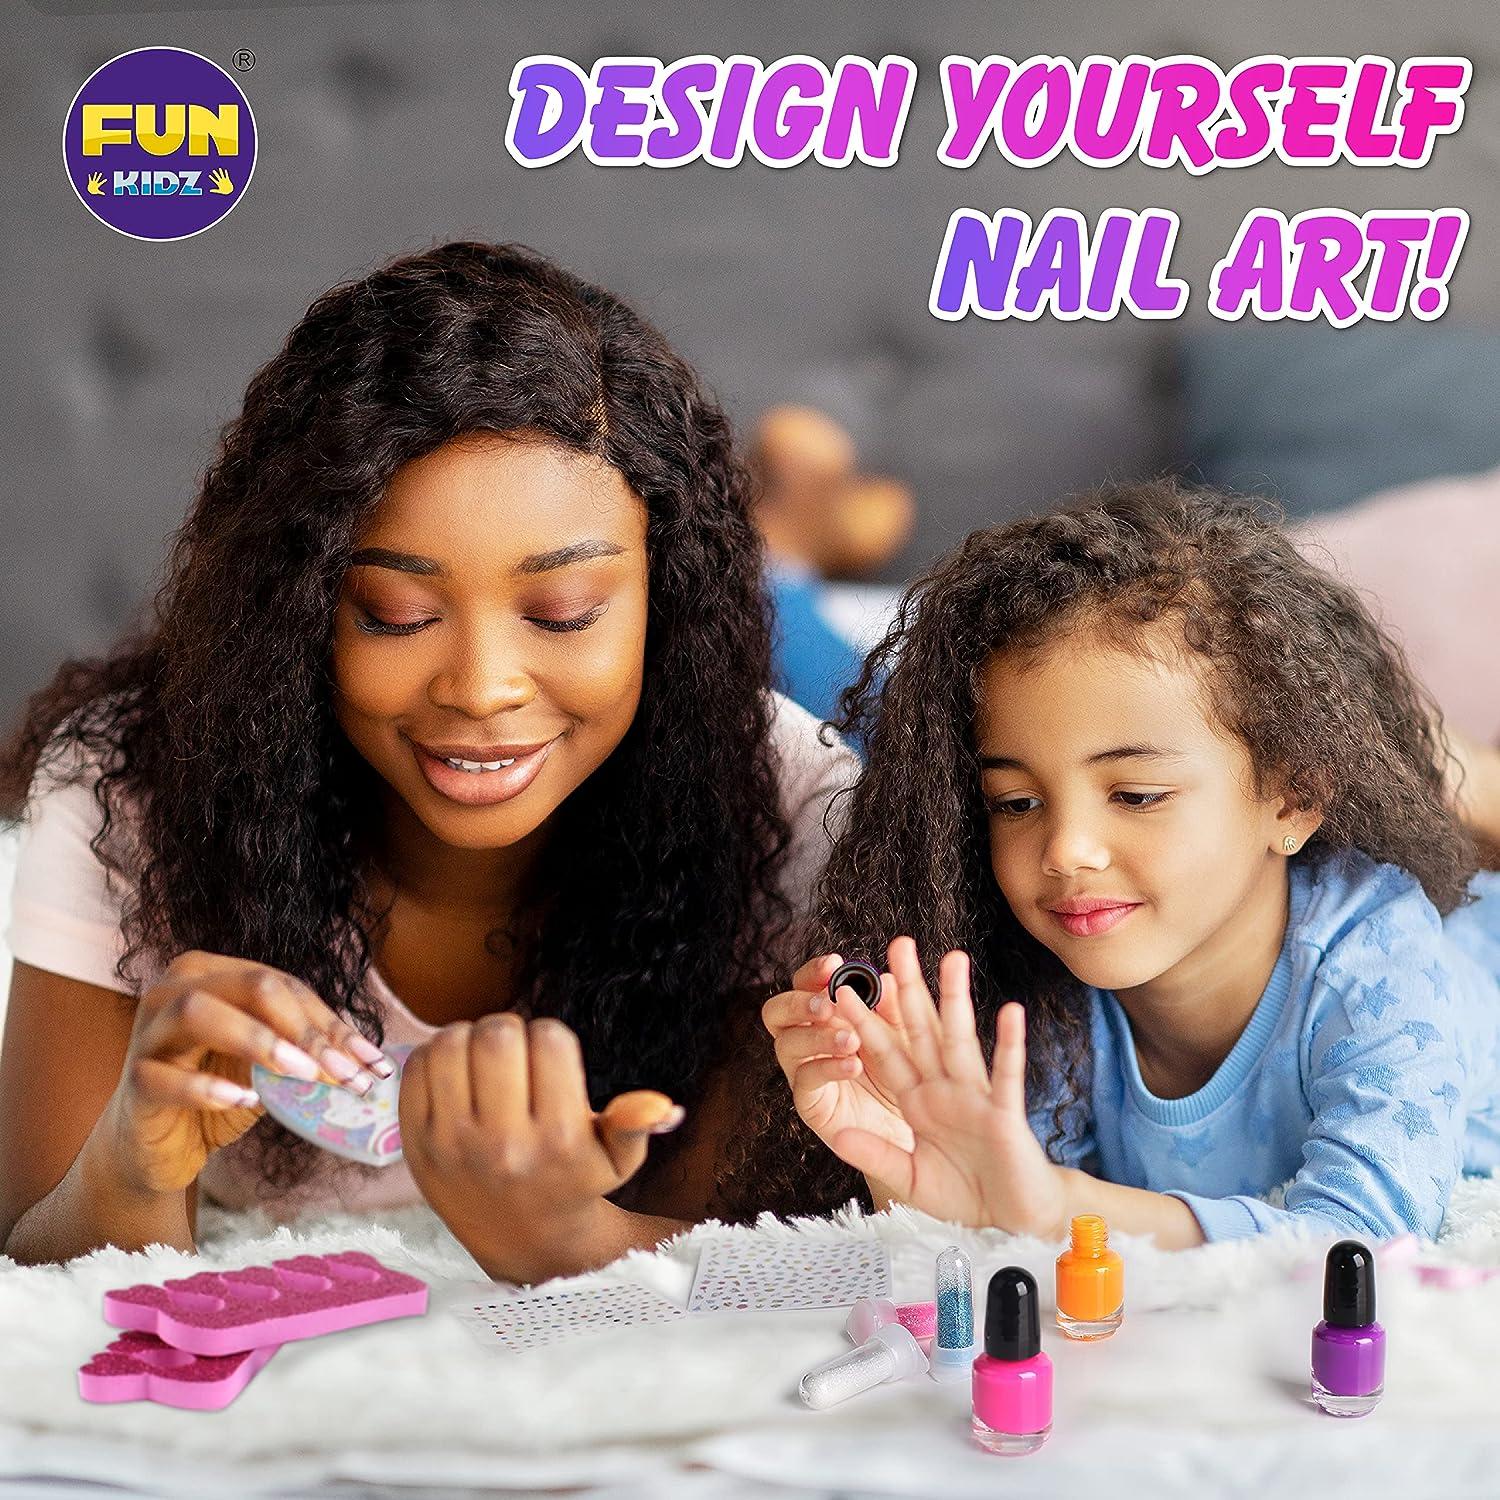 Nail Art Kit for Girls, Nail Polish Kit for Kids Ages 7-12 Years Old, Ideal